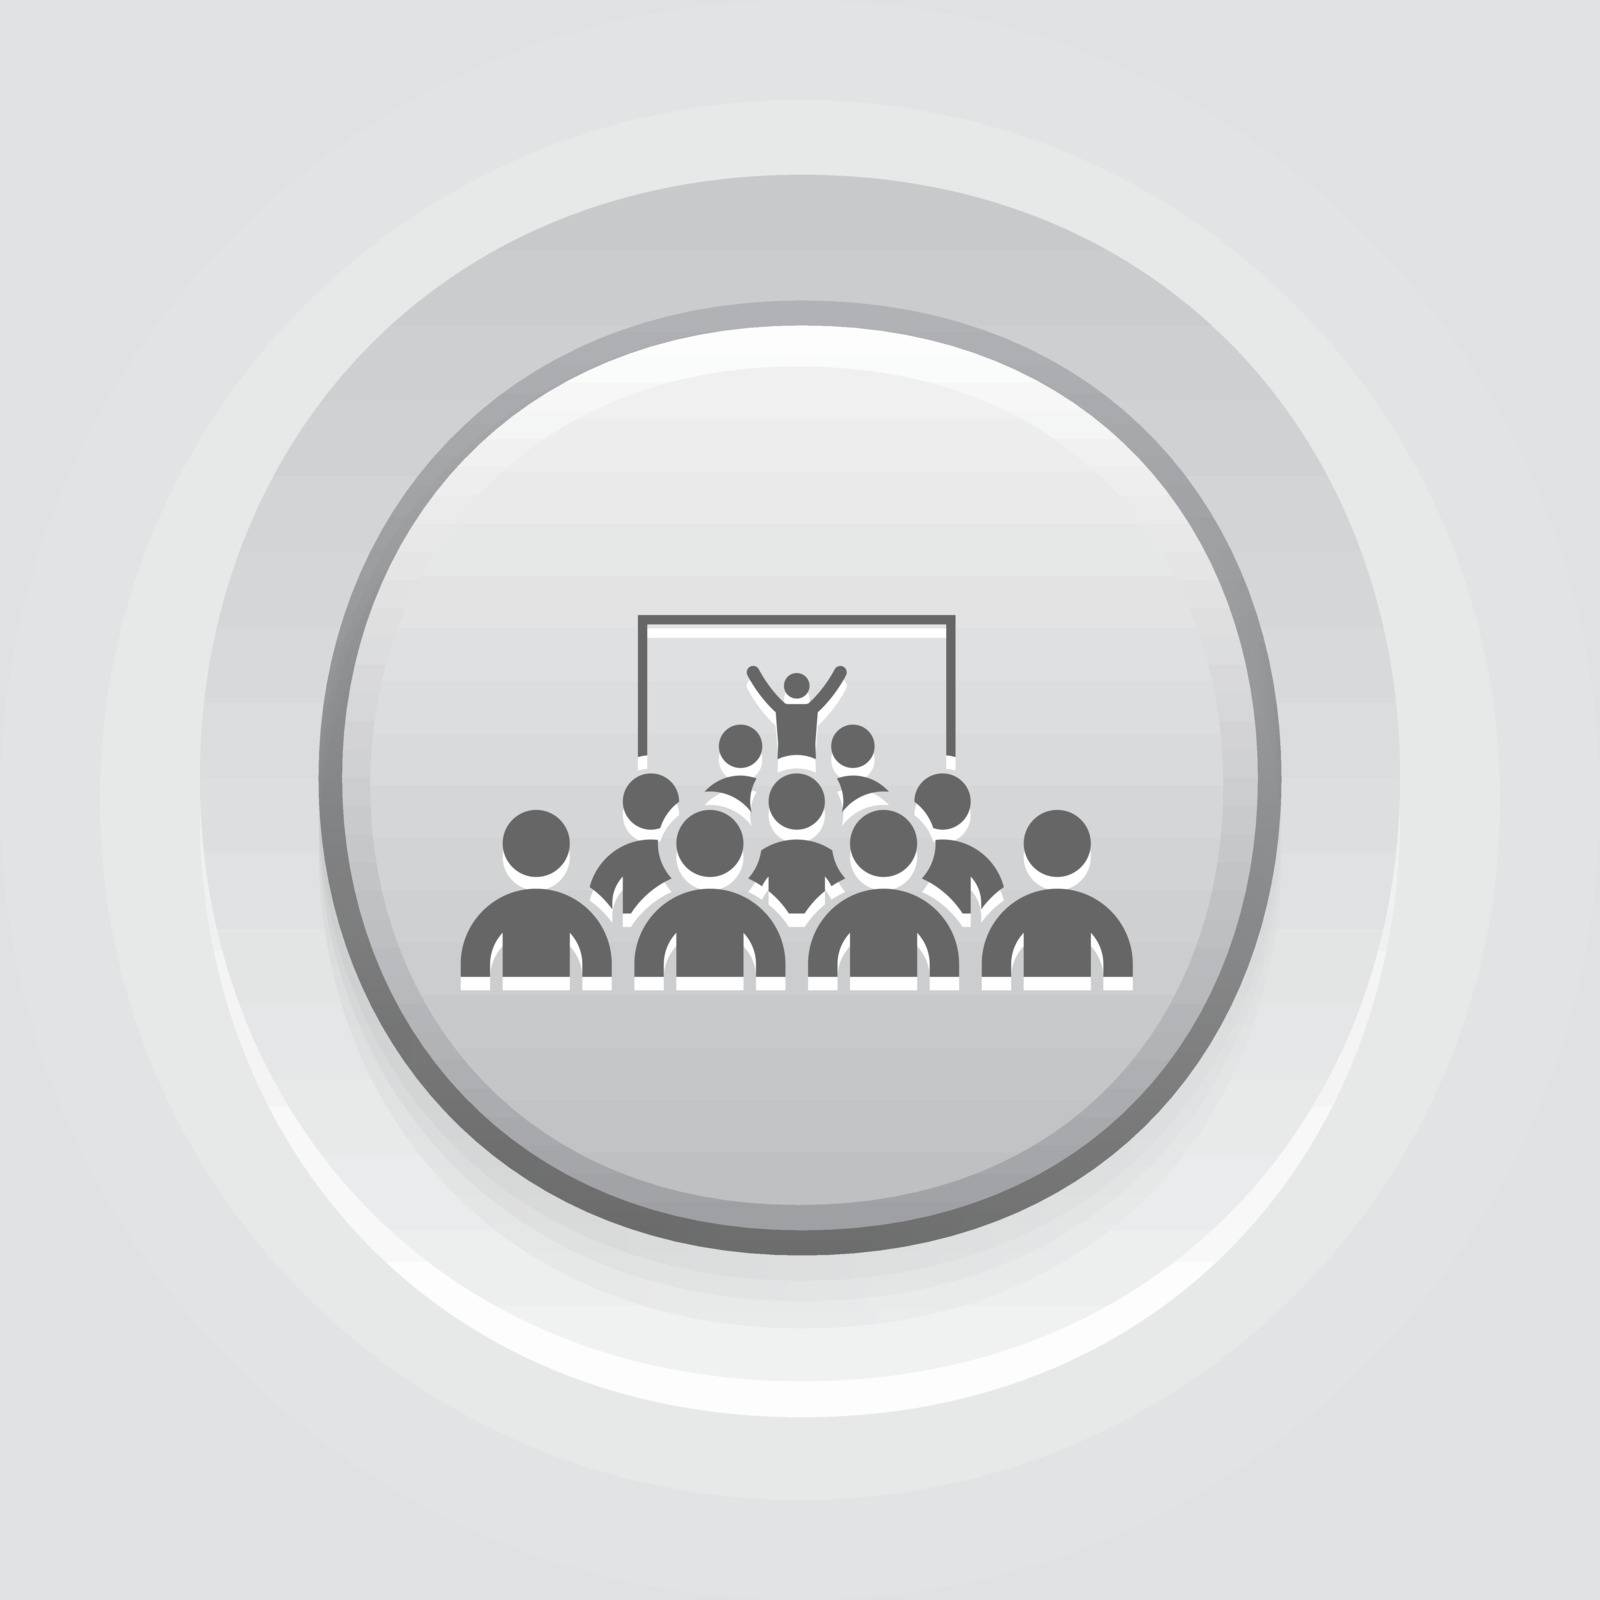 Training Icon. Business Concept. Group of People on Conference. Grey Button Design. Isolated Illustration. App Symbol or UI element.